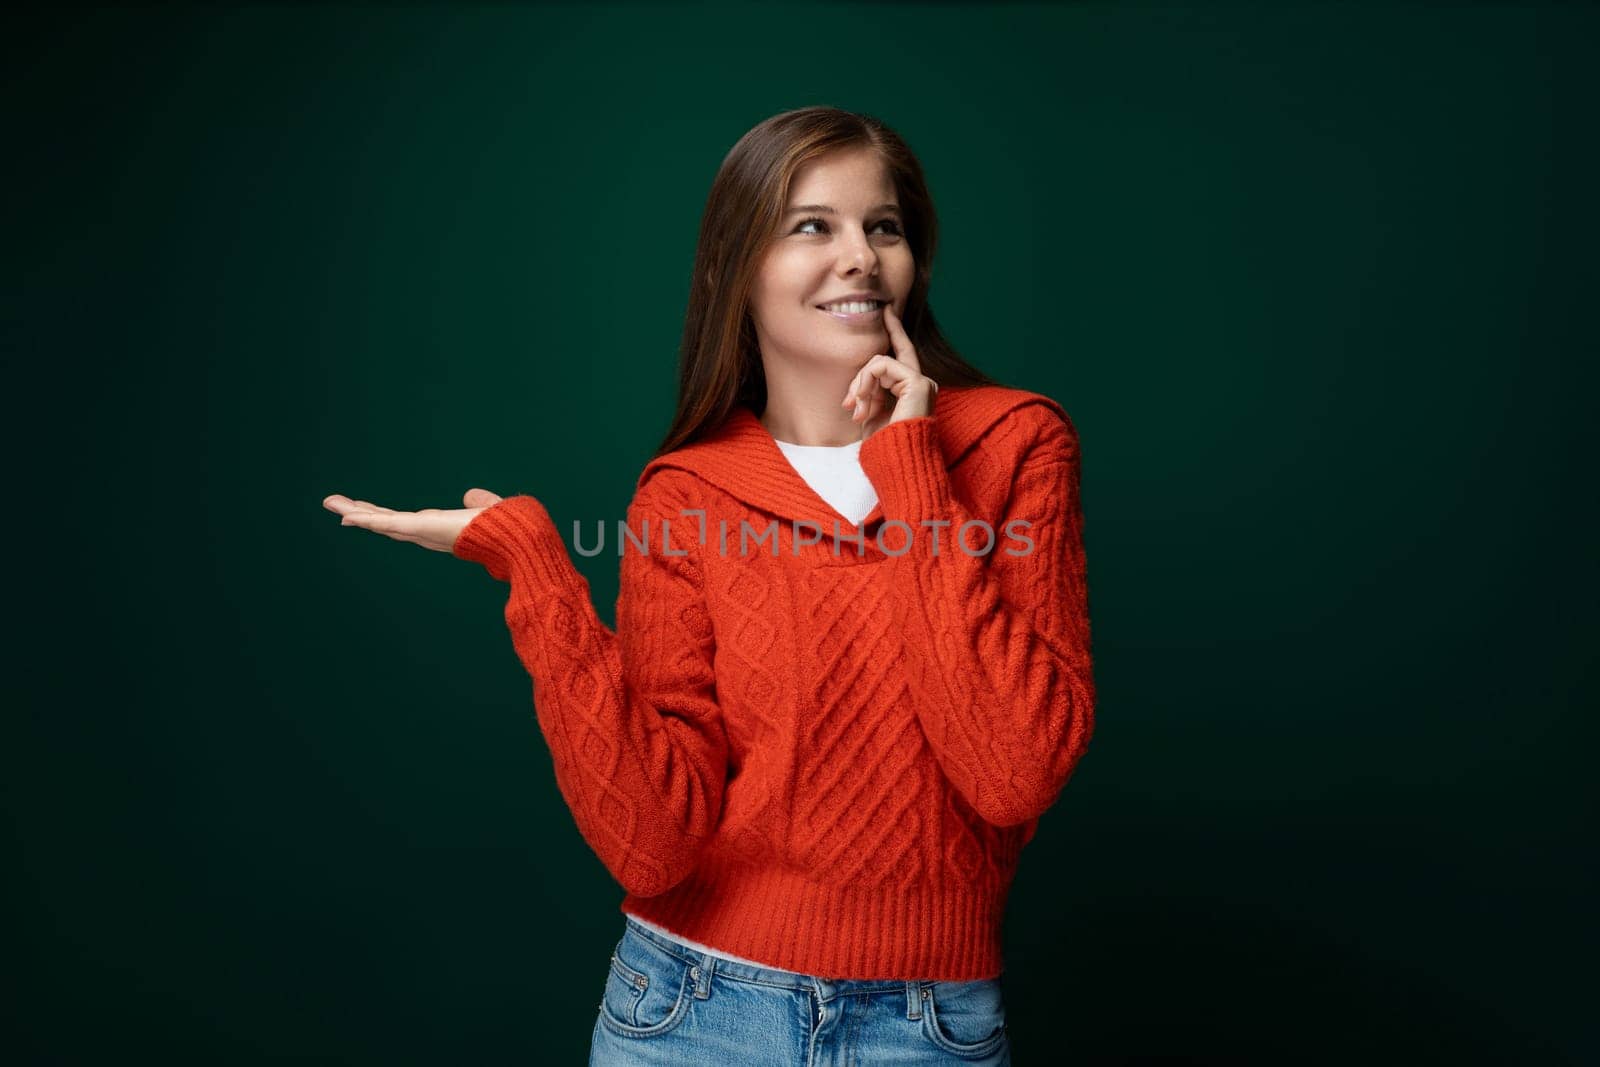 Dreamy 30 year old woman with brown hair in a red sweater on a green dark background.